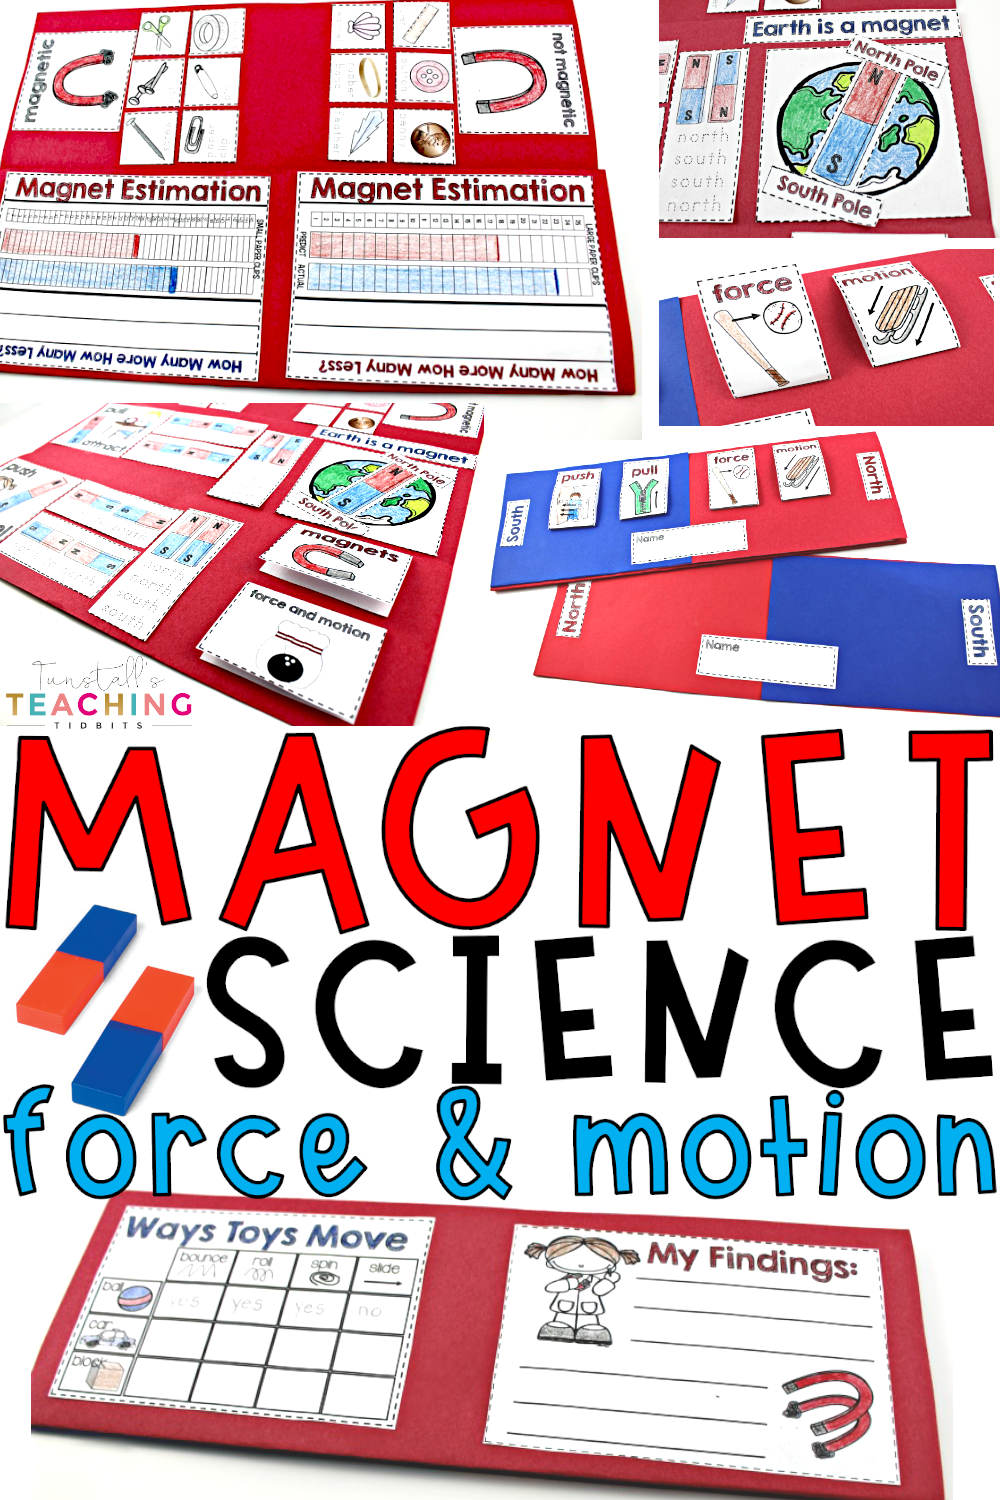 Magnets, Force, and Motion